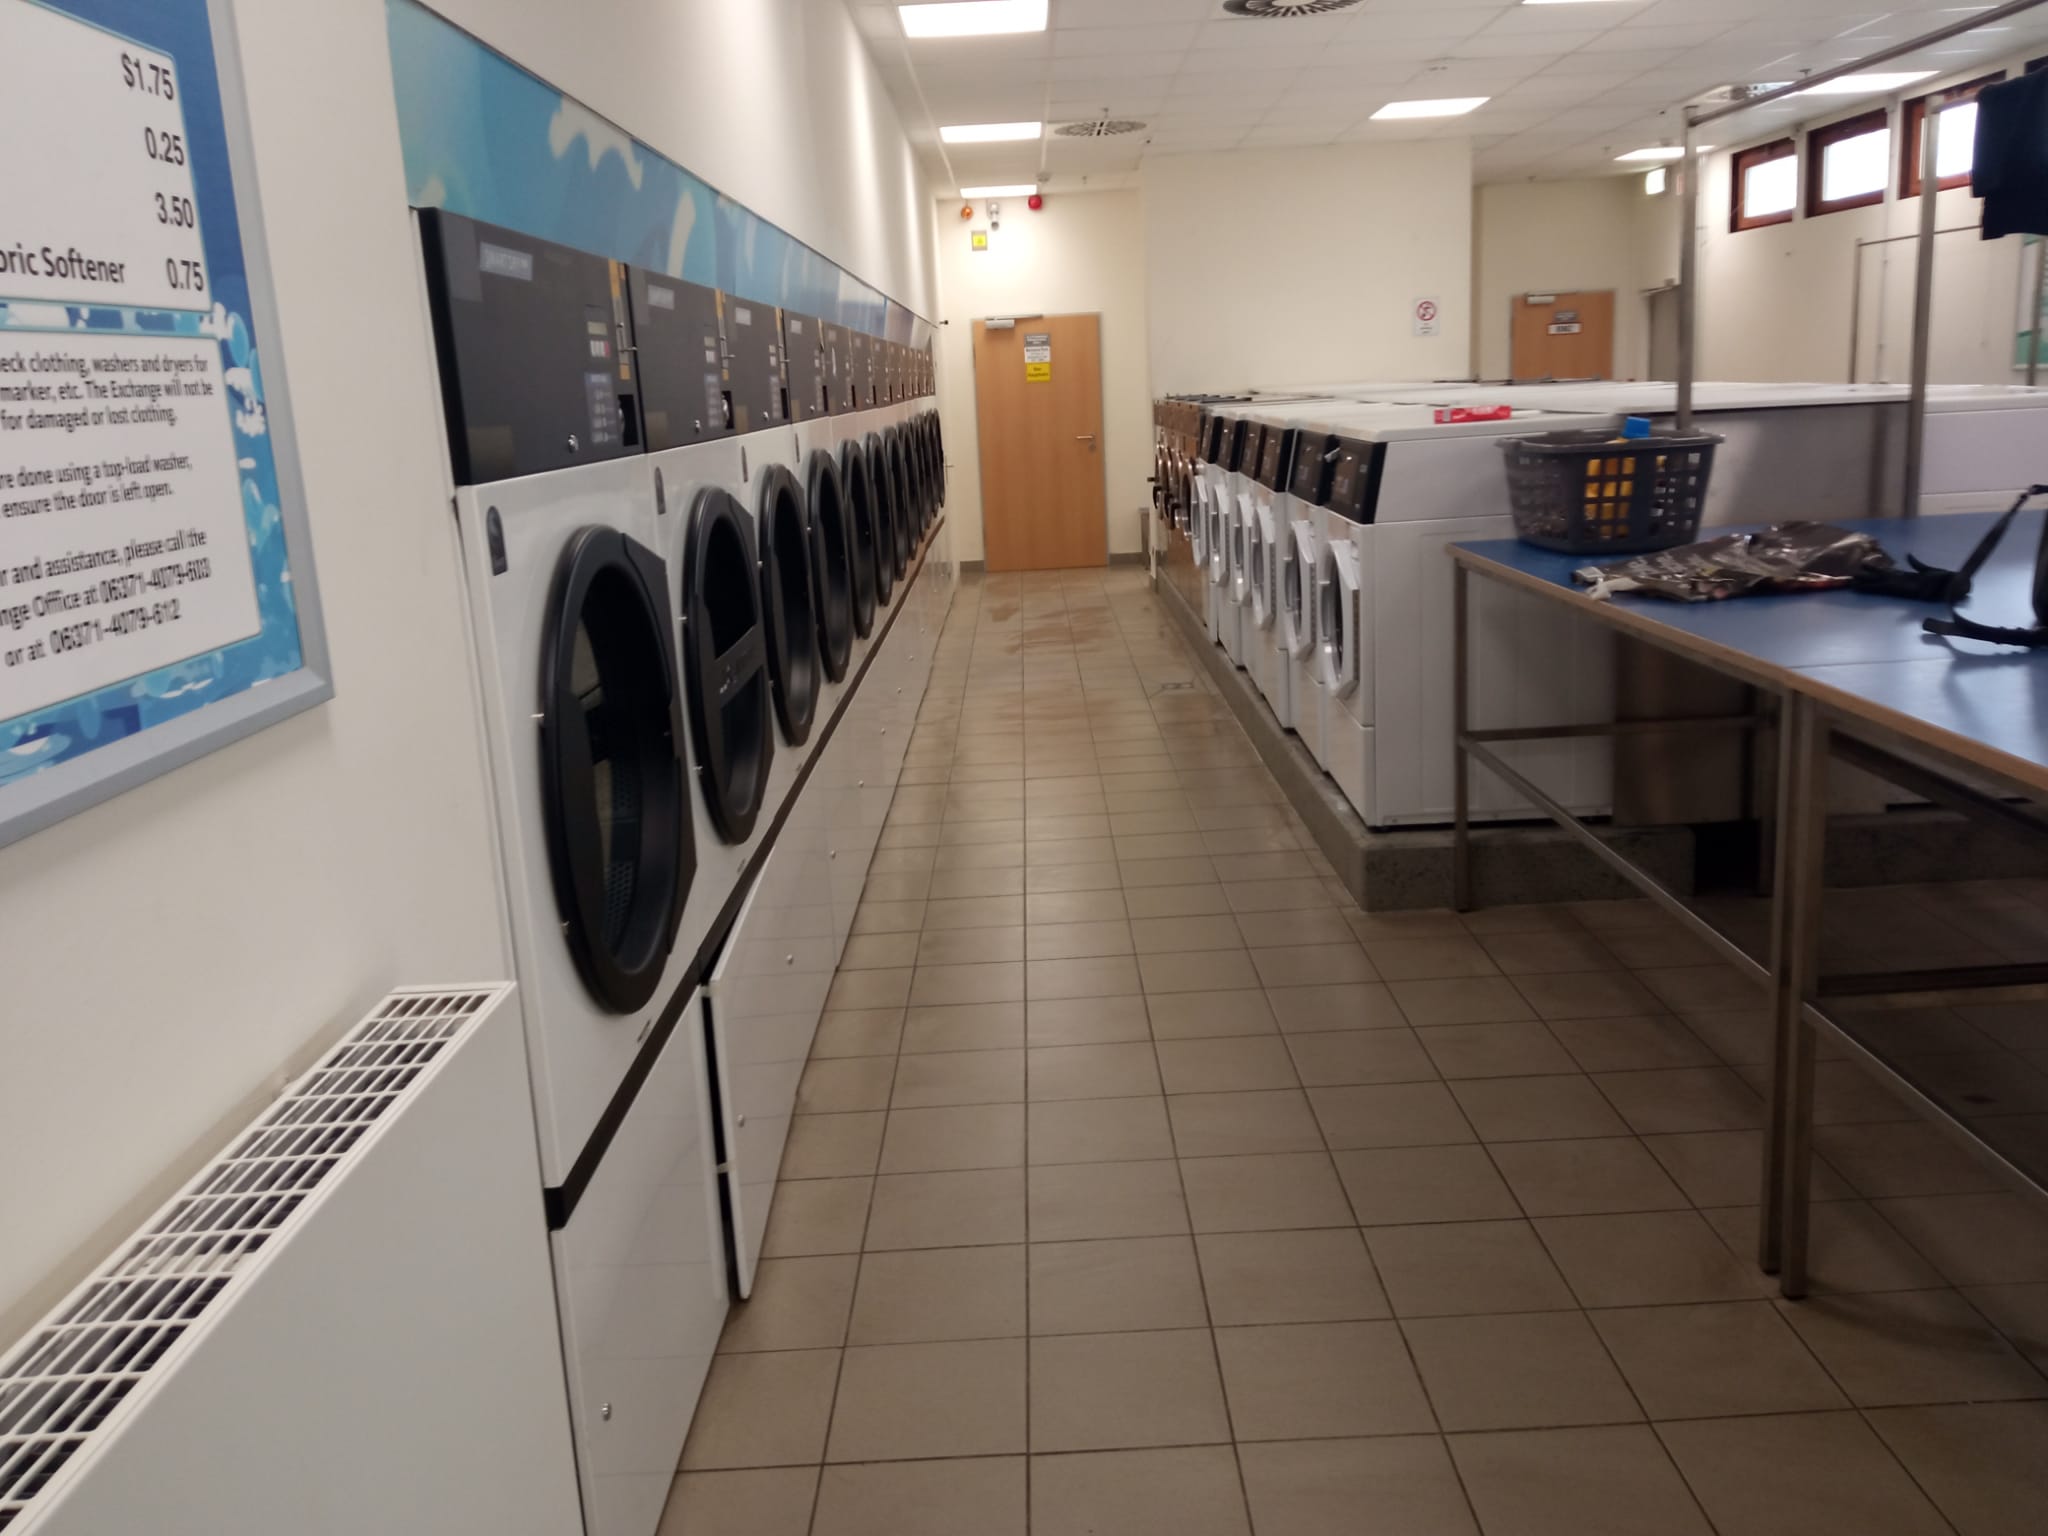 Nasa Awarded the Baumholder Washer/Dryer Vending Services Contract